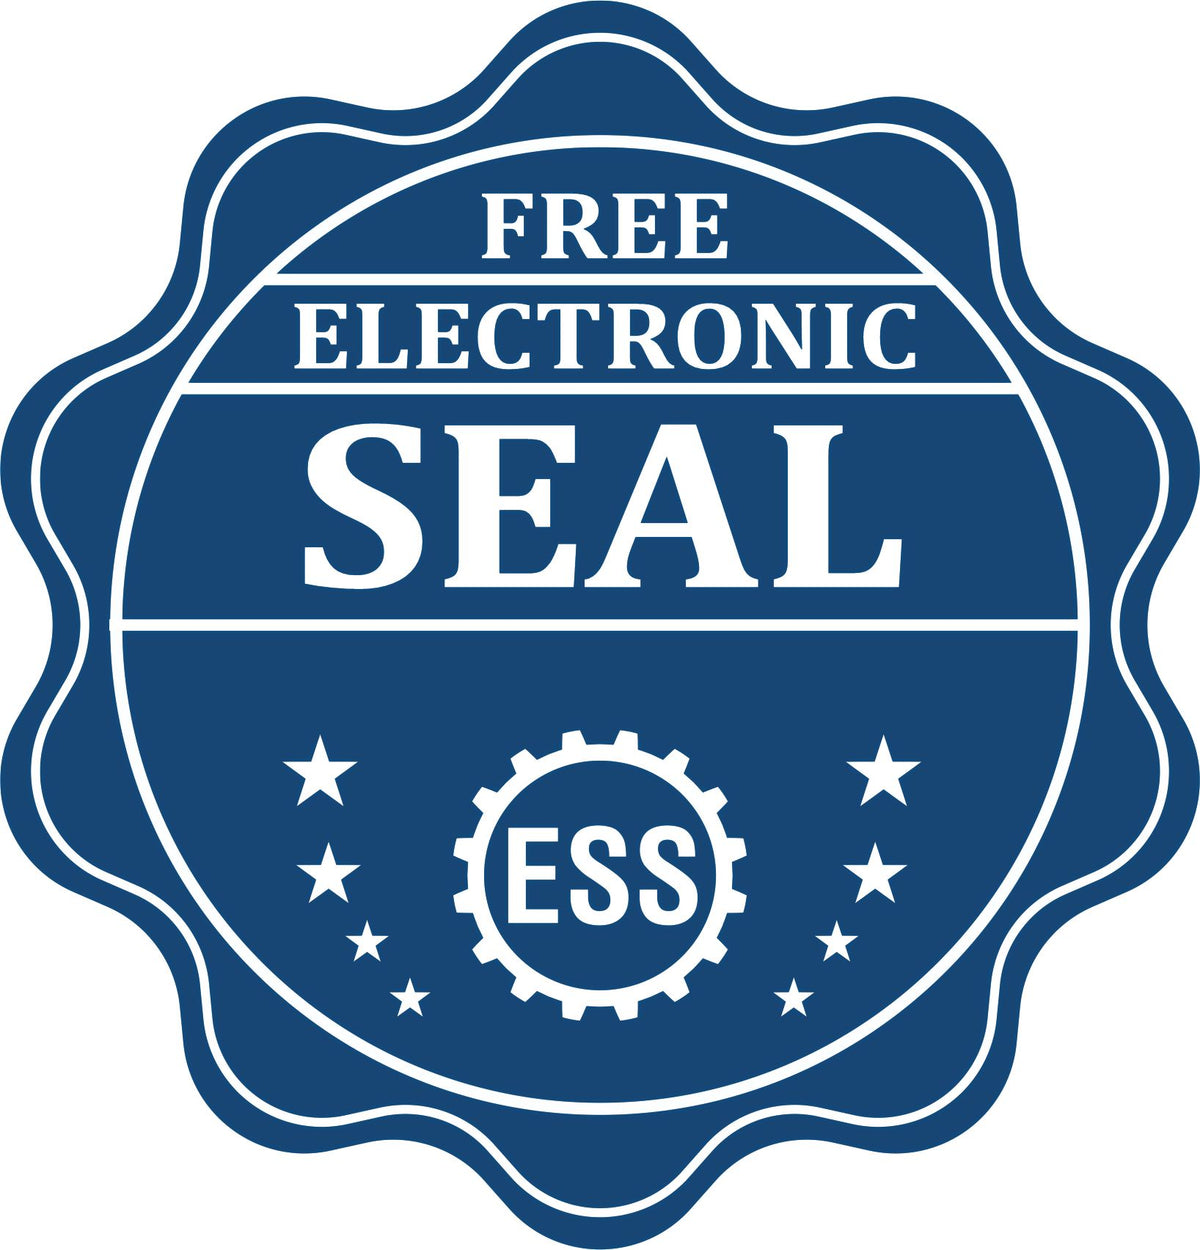 A badge showing a free electronic seal for the Long Reach New Mexico PE Seal with stars and the ESS gear on the emblem.